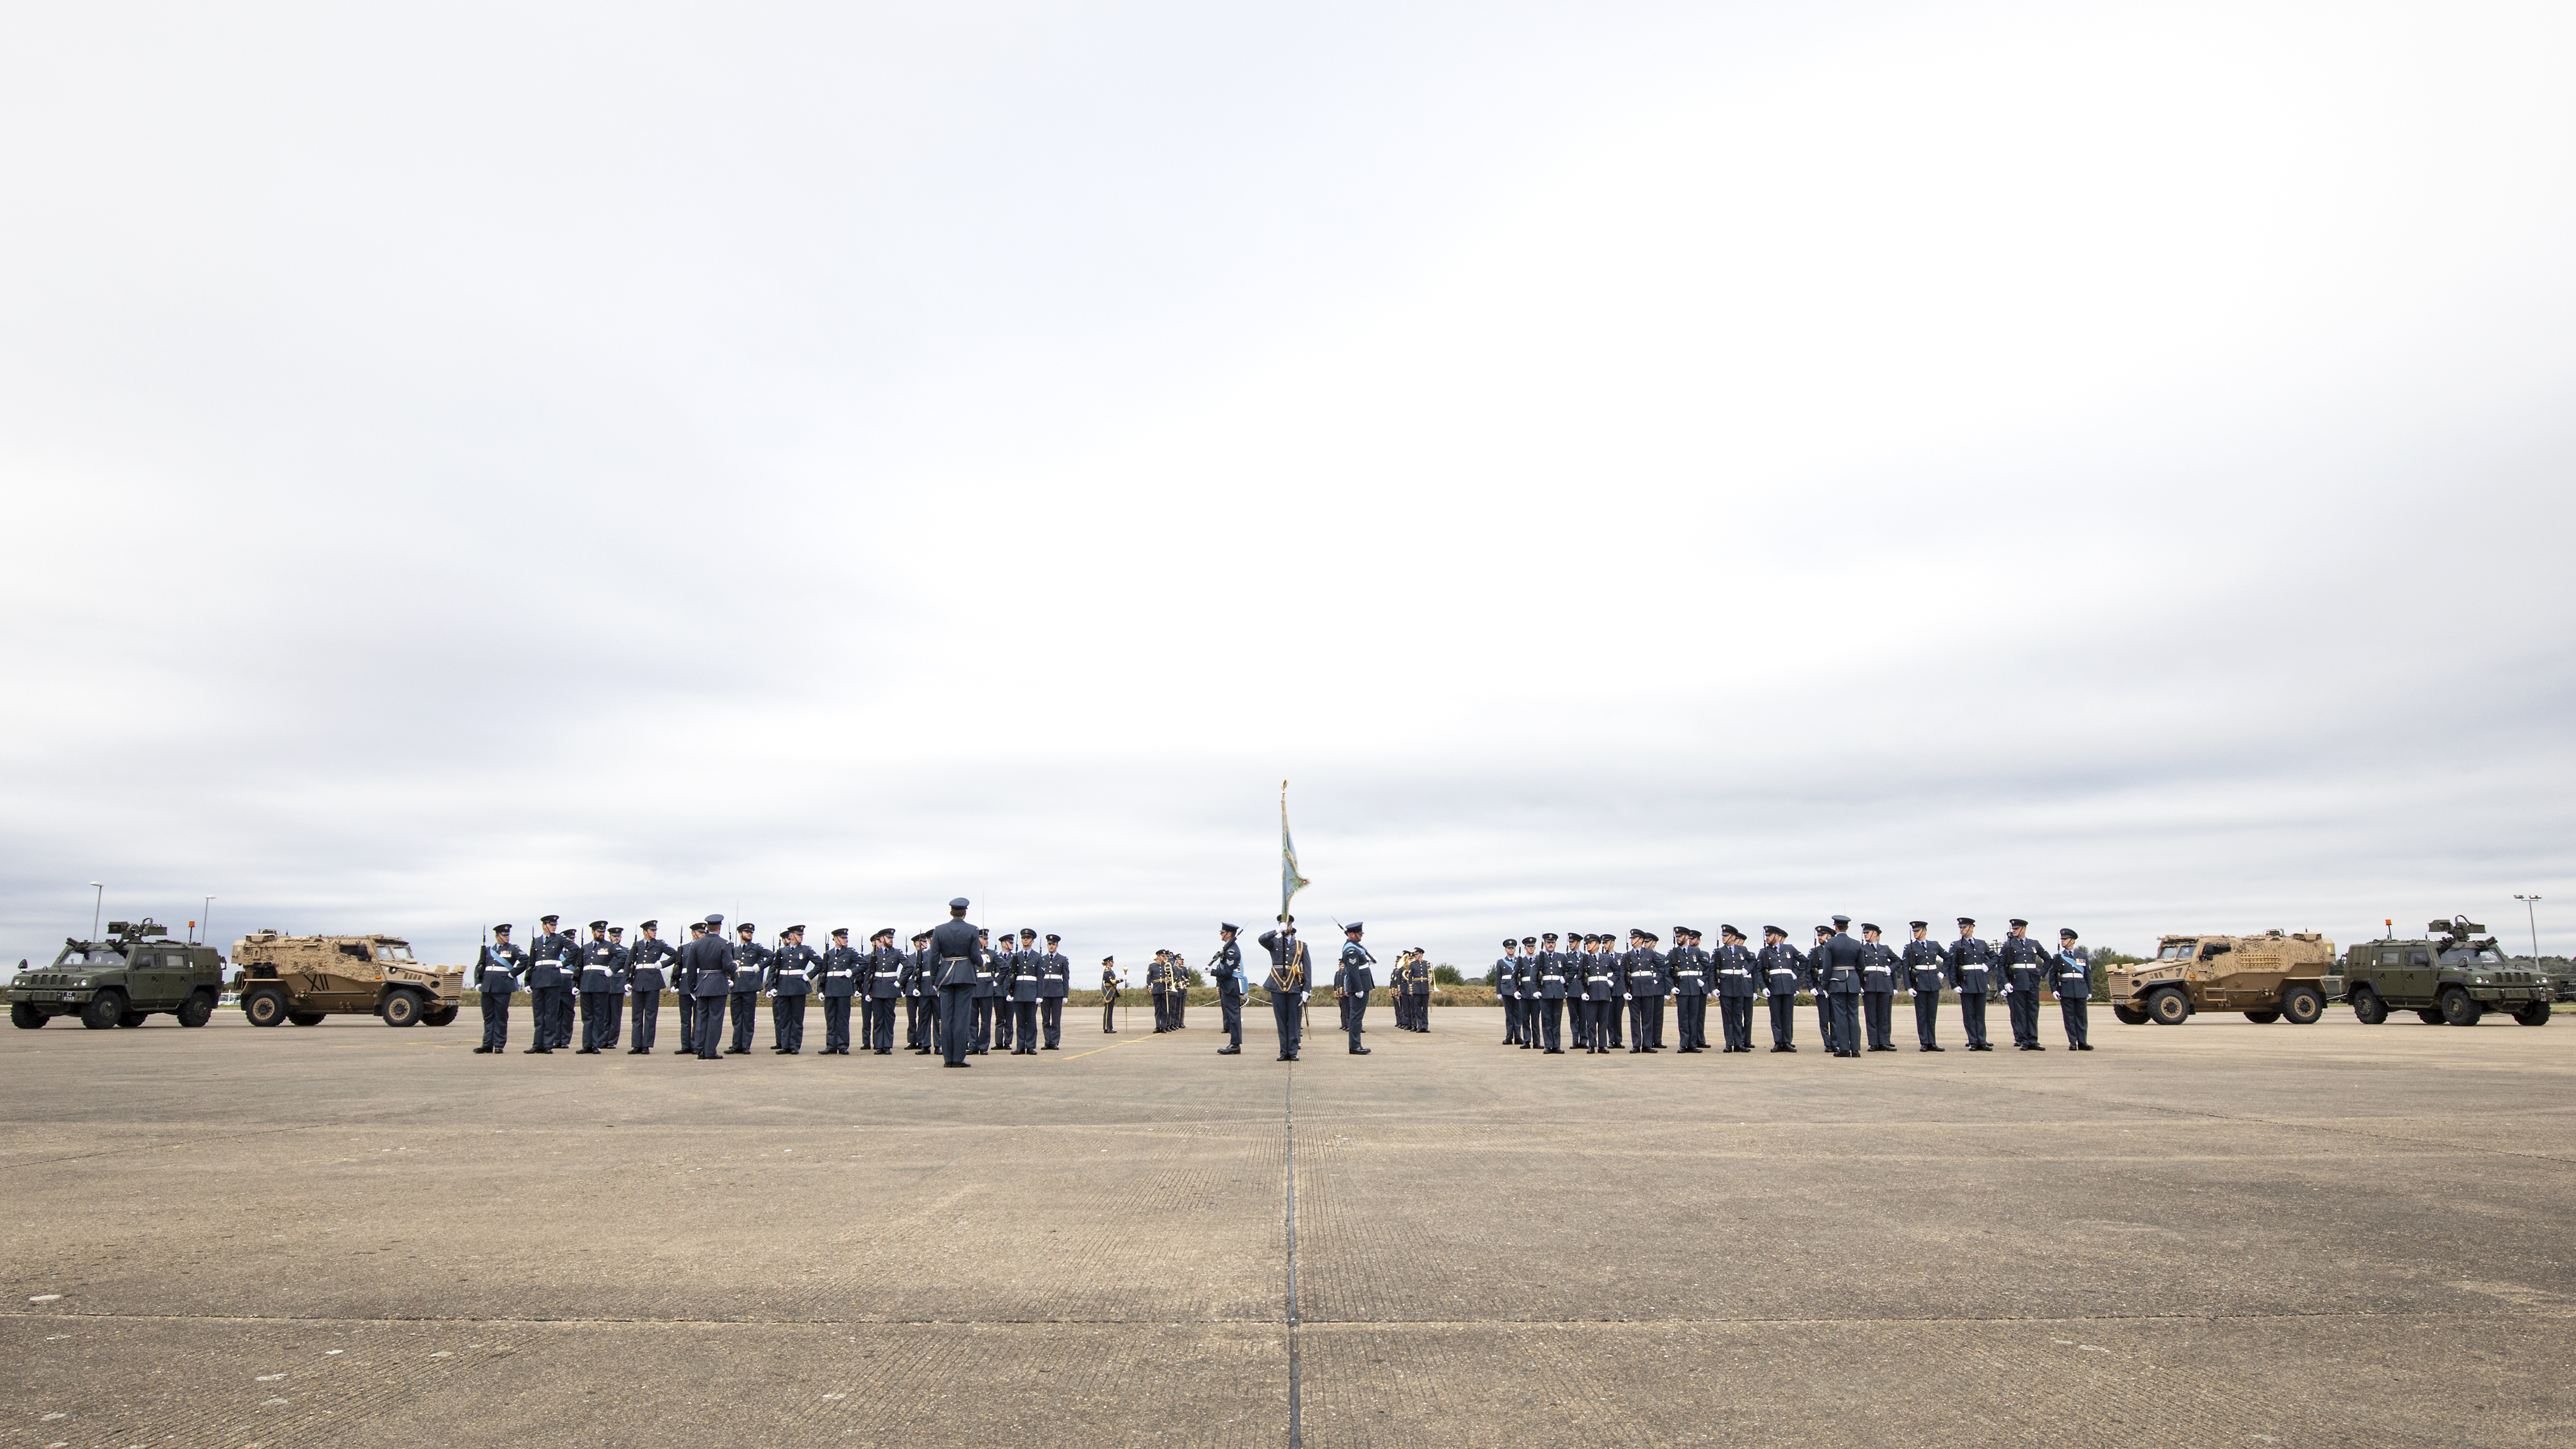 Personnel on parade with vehicles.